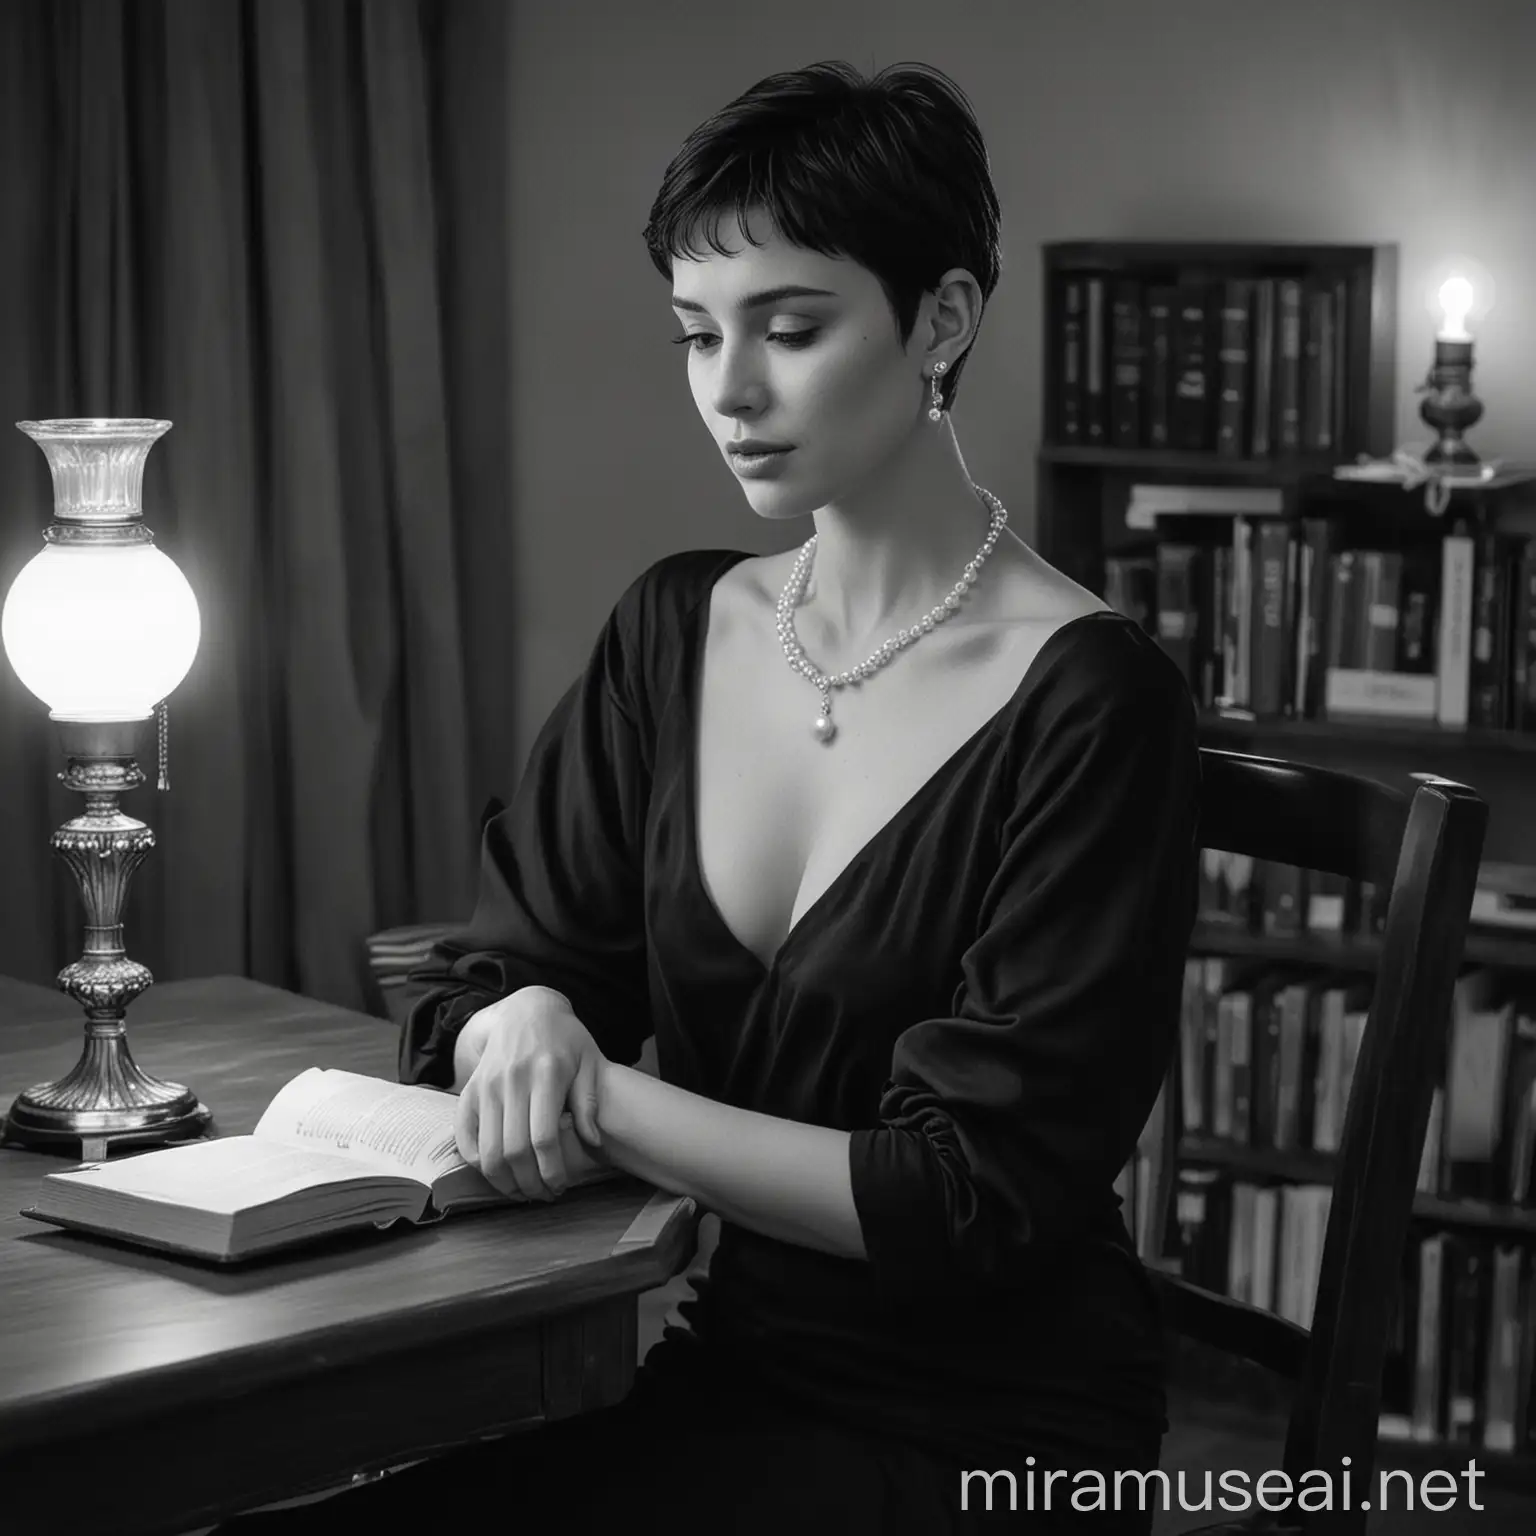 In the monochrome picture, a short-haired woman with a pearl necklace and earrings wearing black clothes sits on the chair and puts one of her hands on the back of the chair, in her back there is a lamp and a few books on the desk.